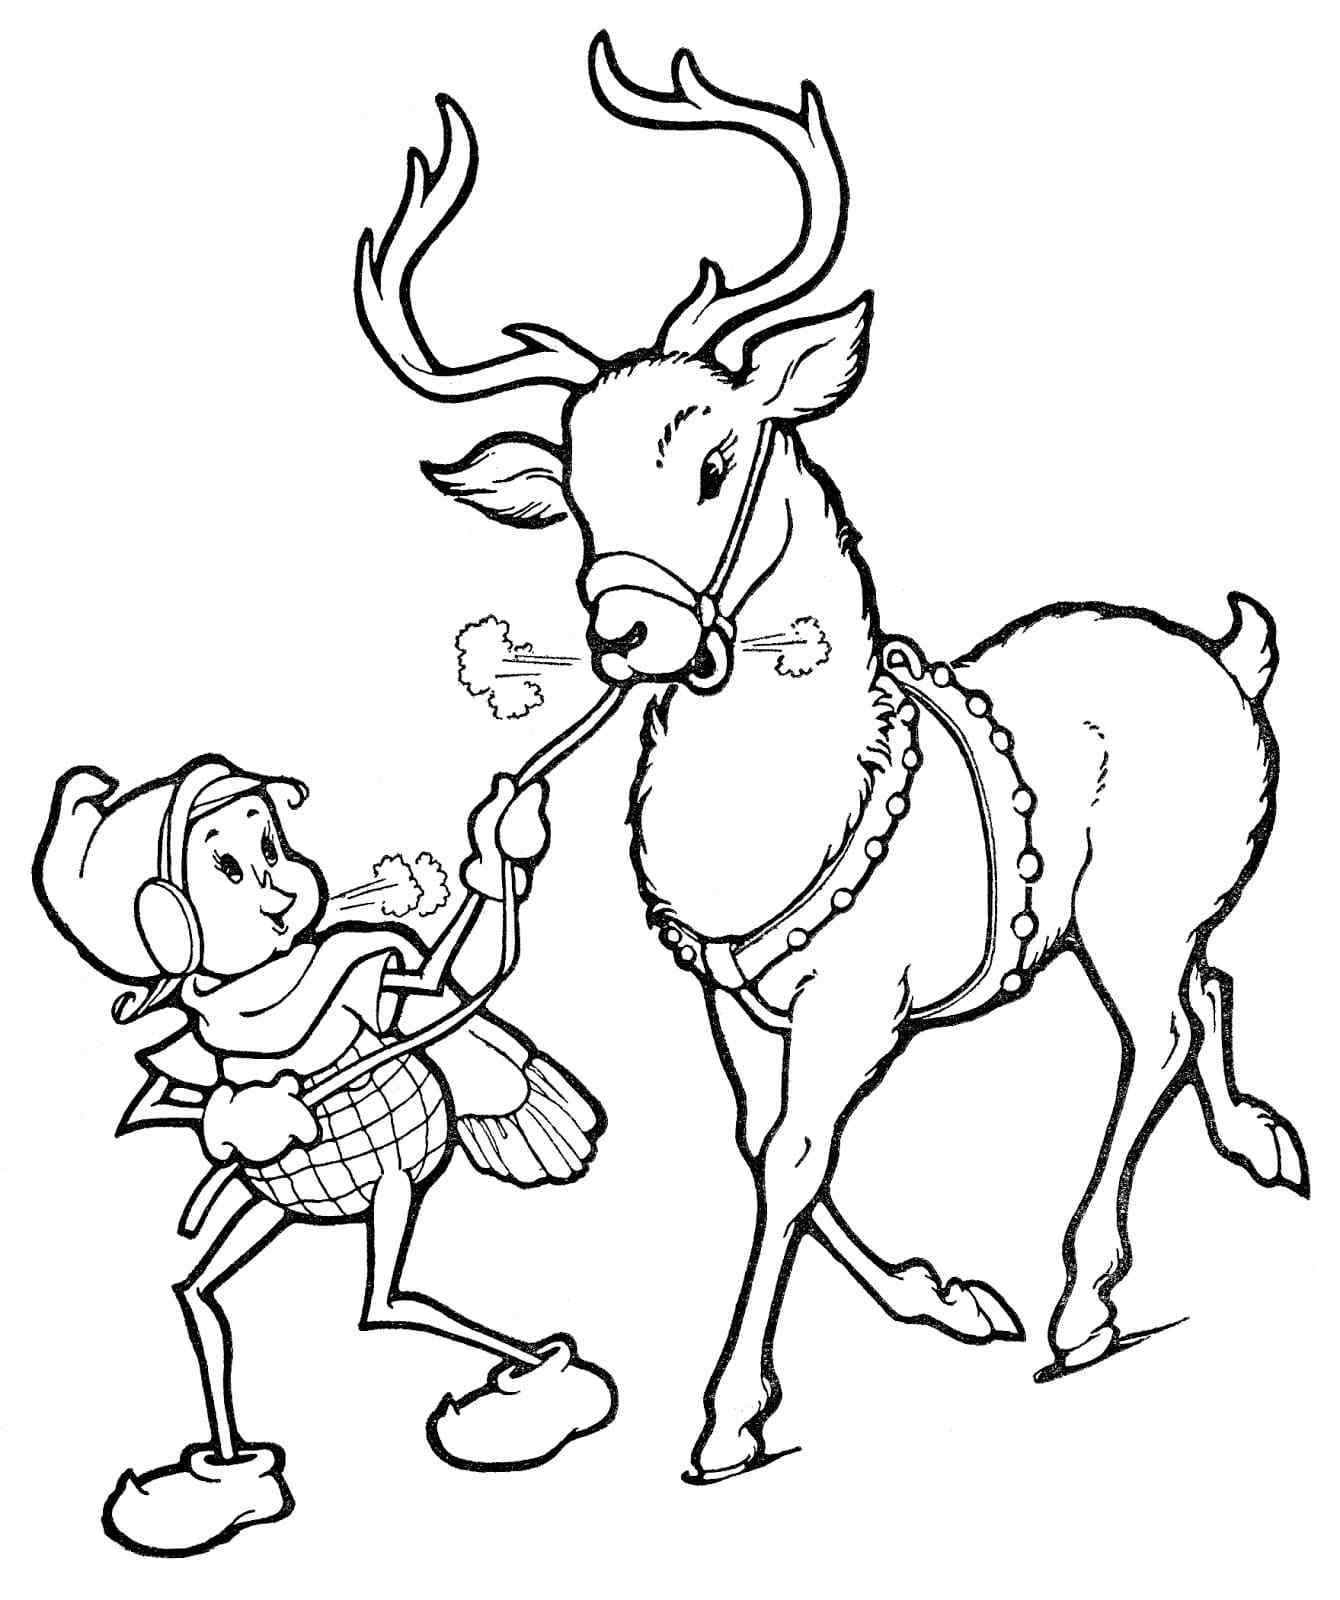 Elf Leads The Deer To The Harness